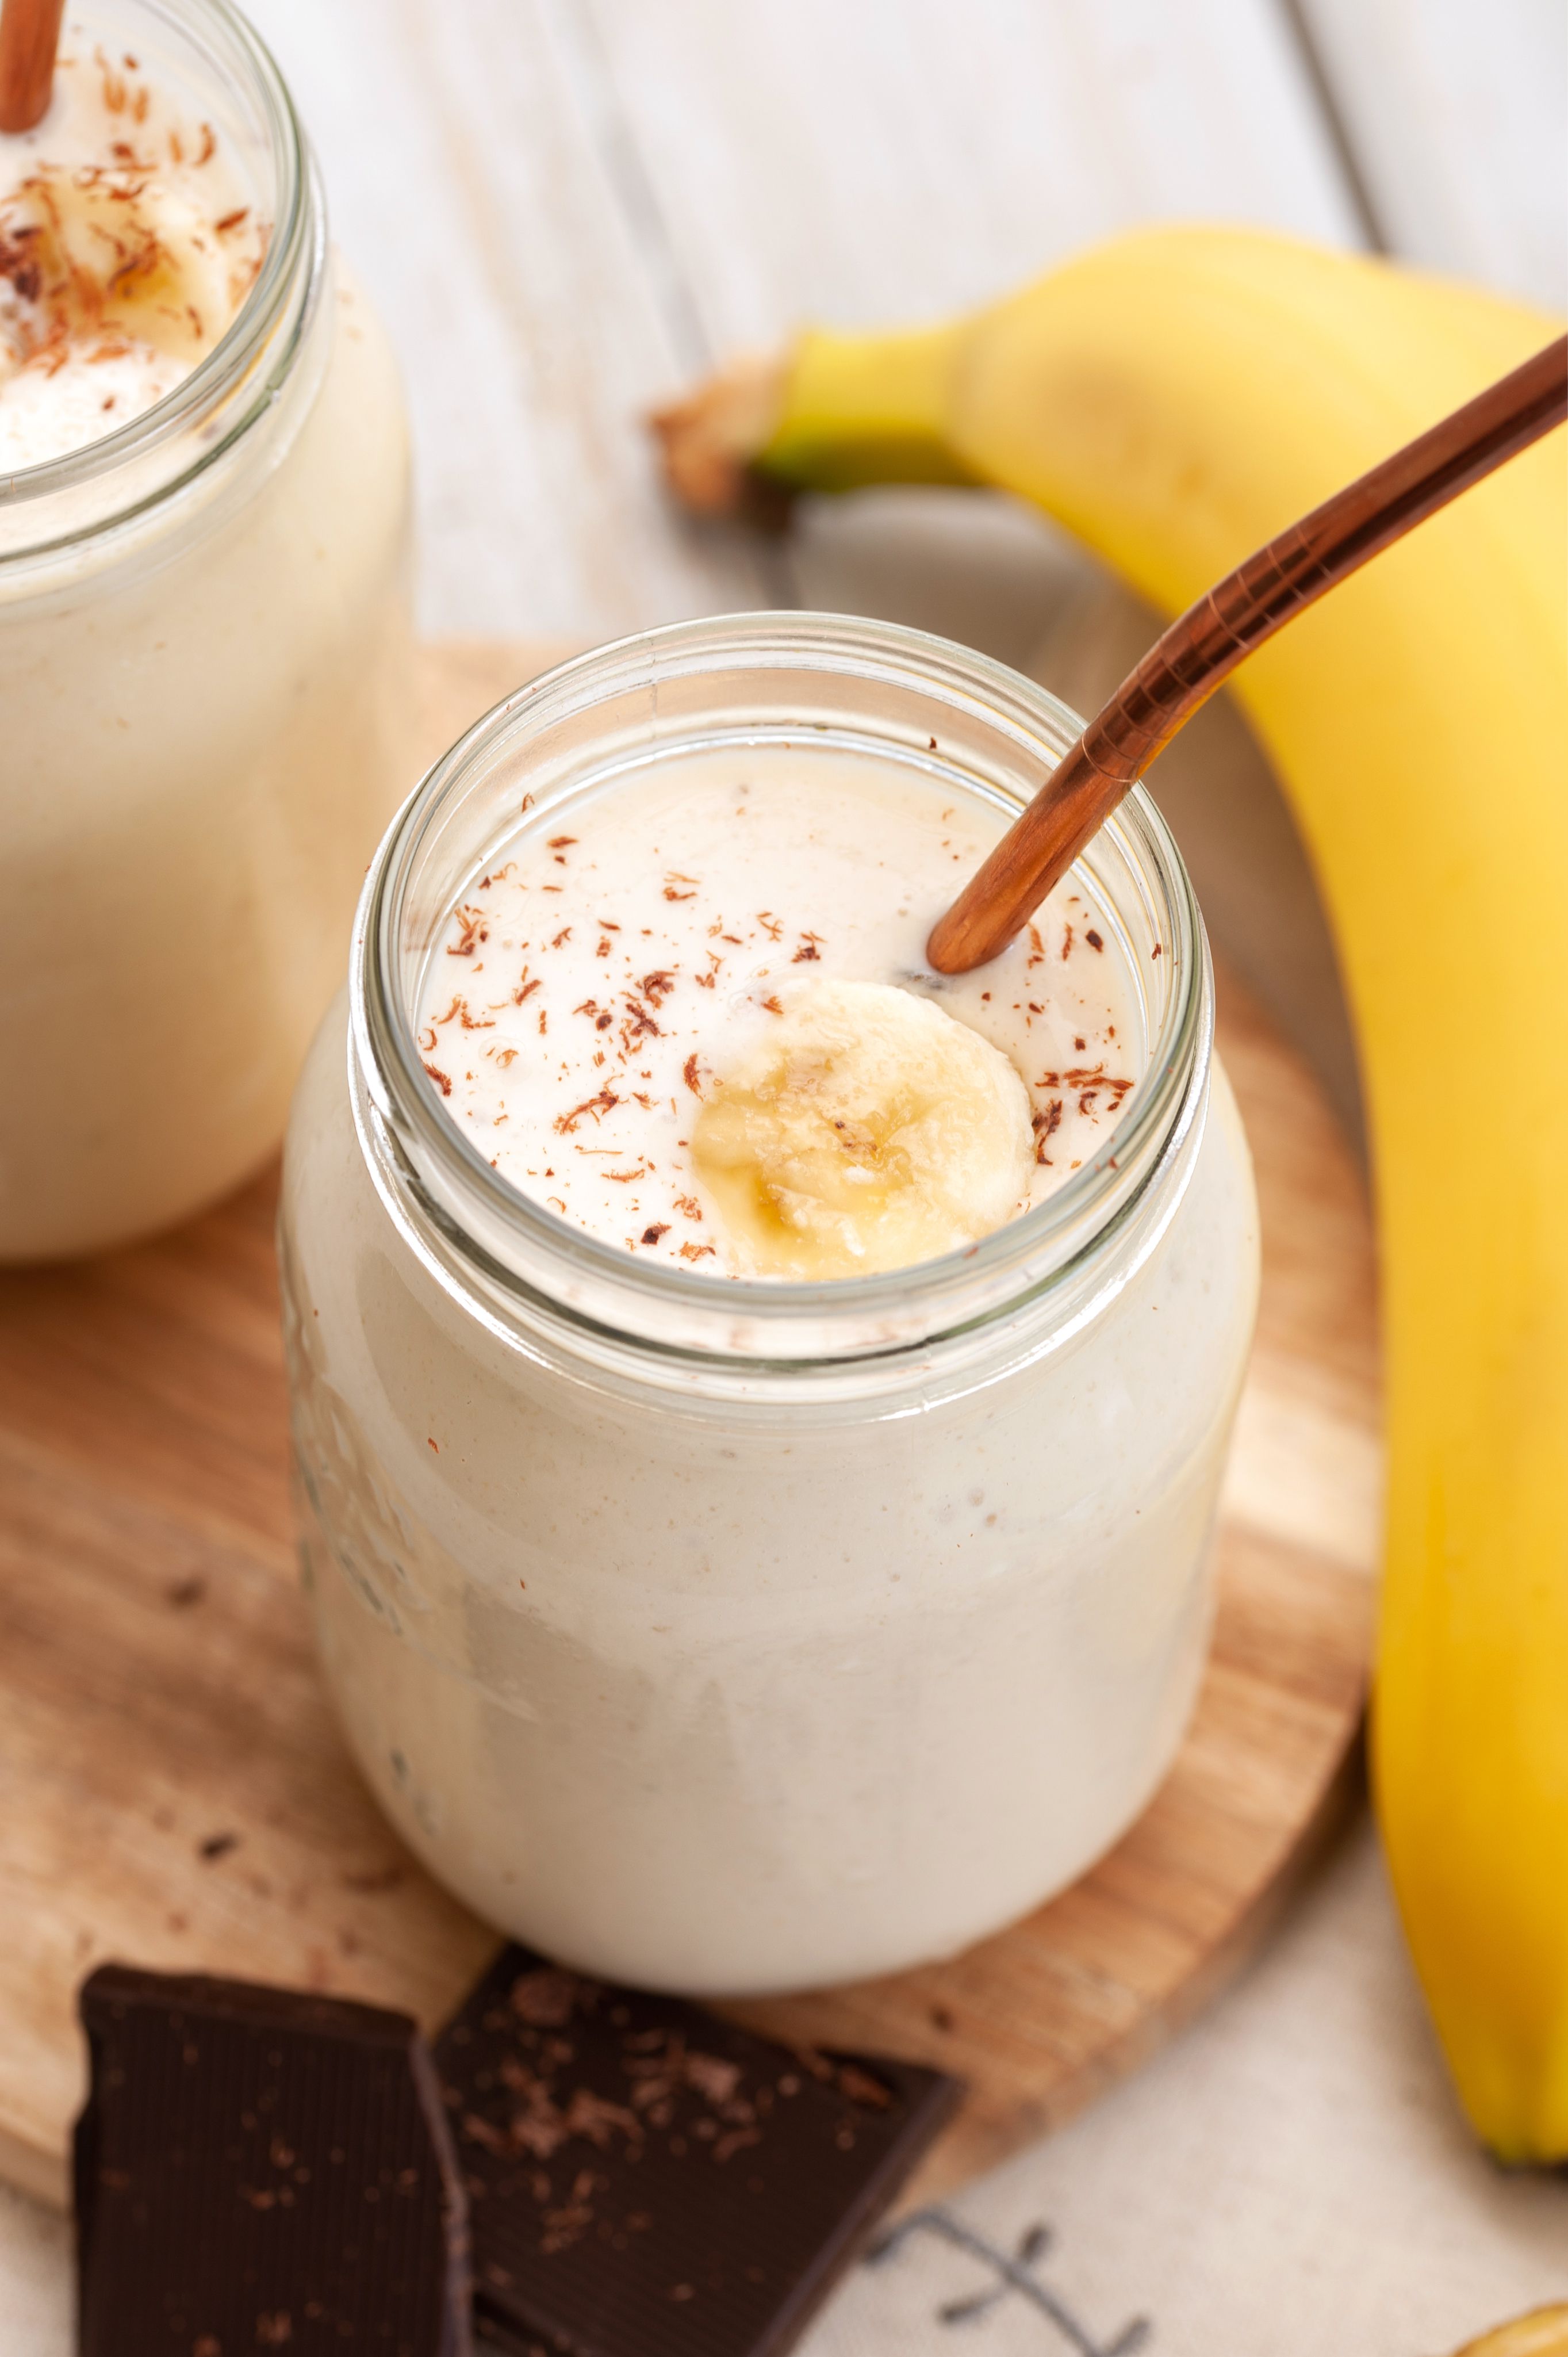 What Can I Use Instead Of Banana In Smoothies - Banana Poster